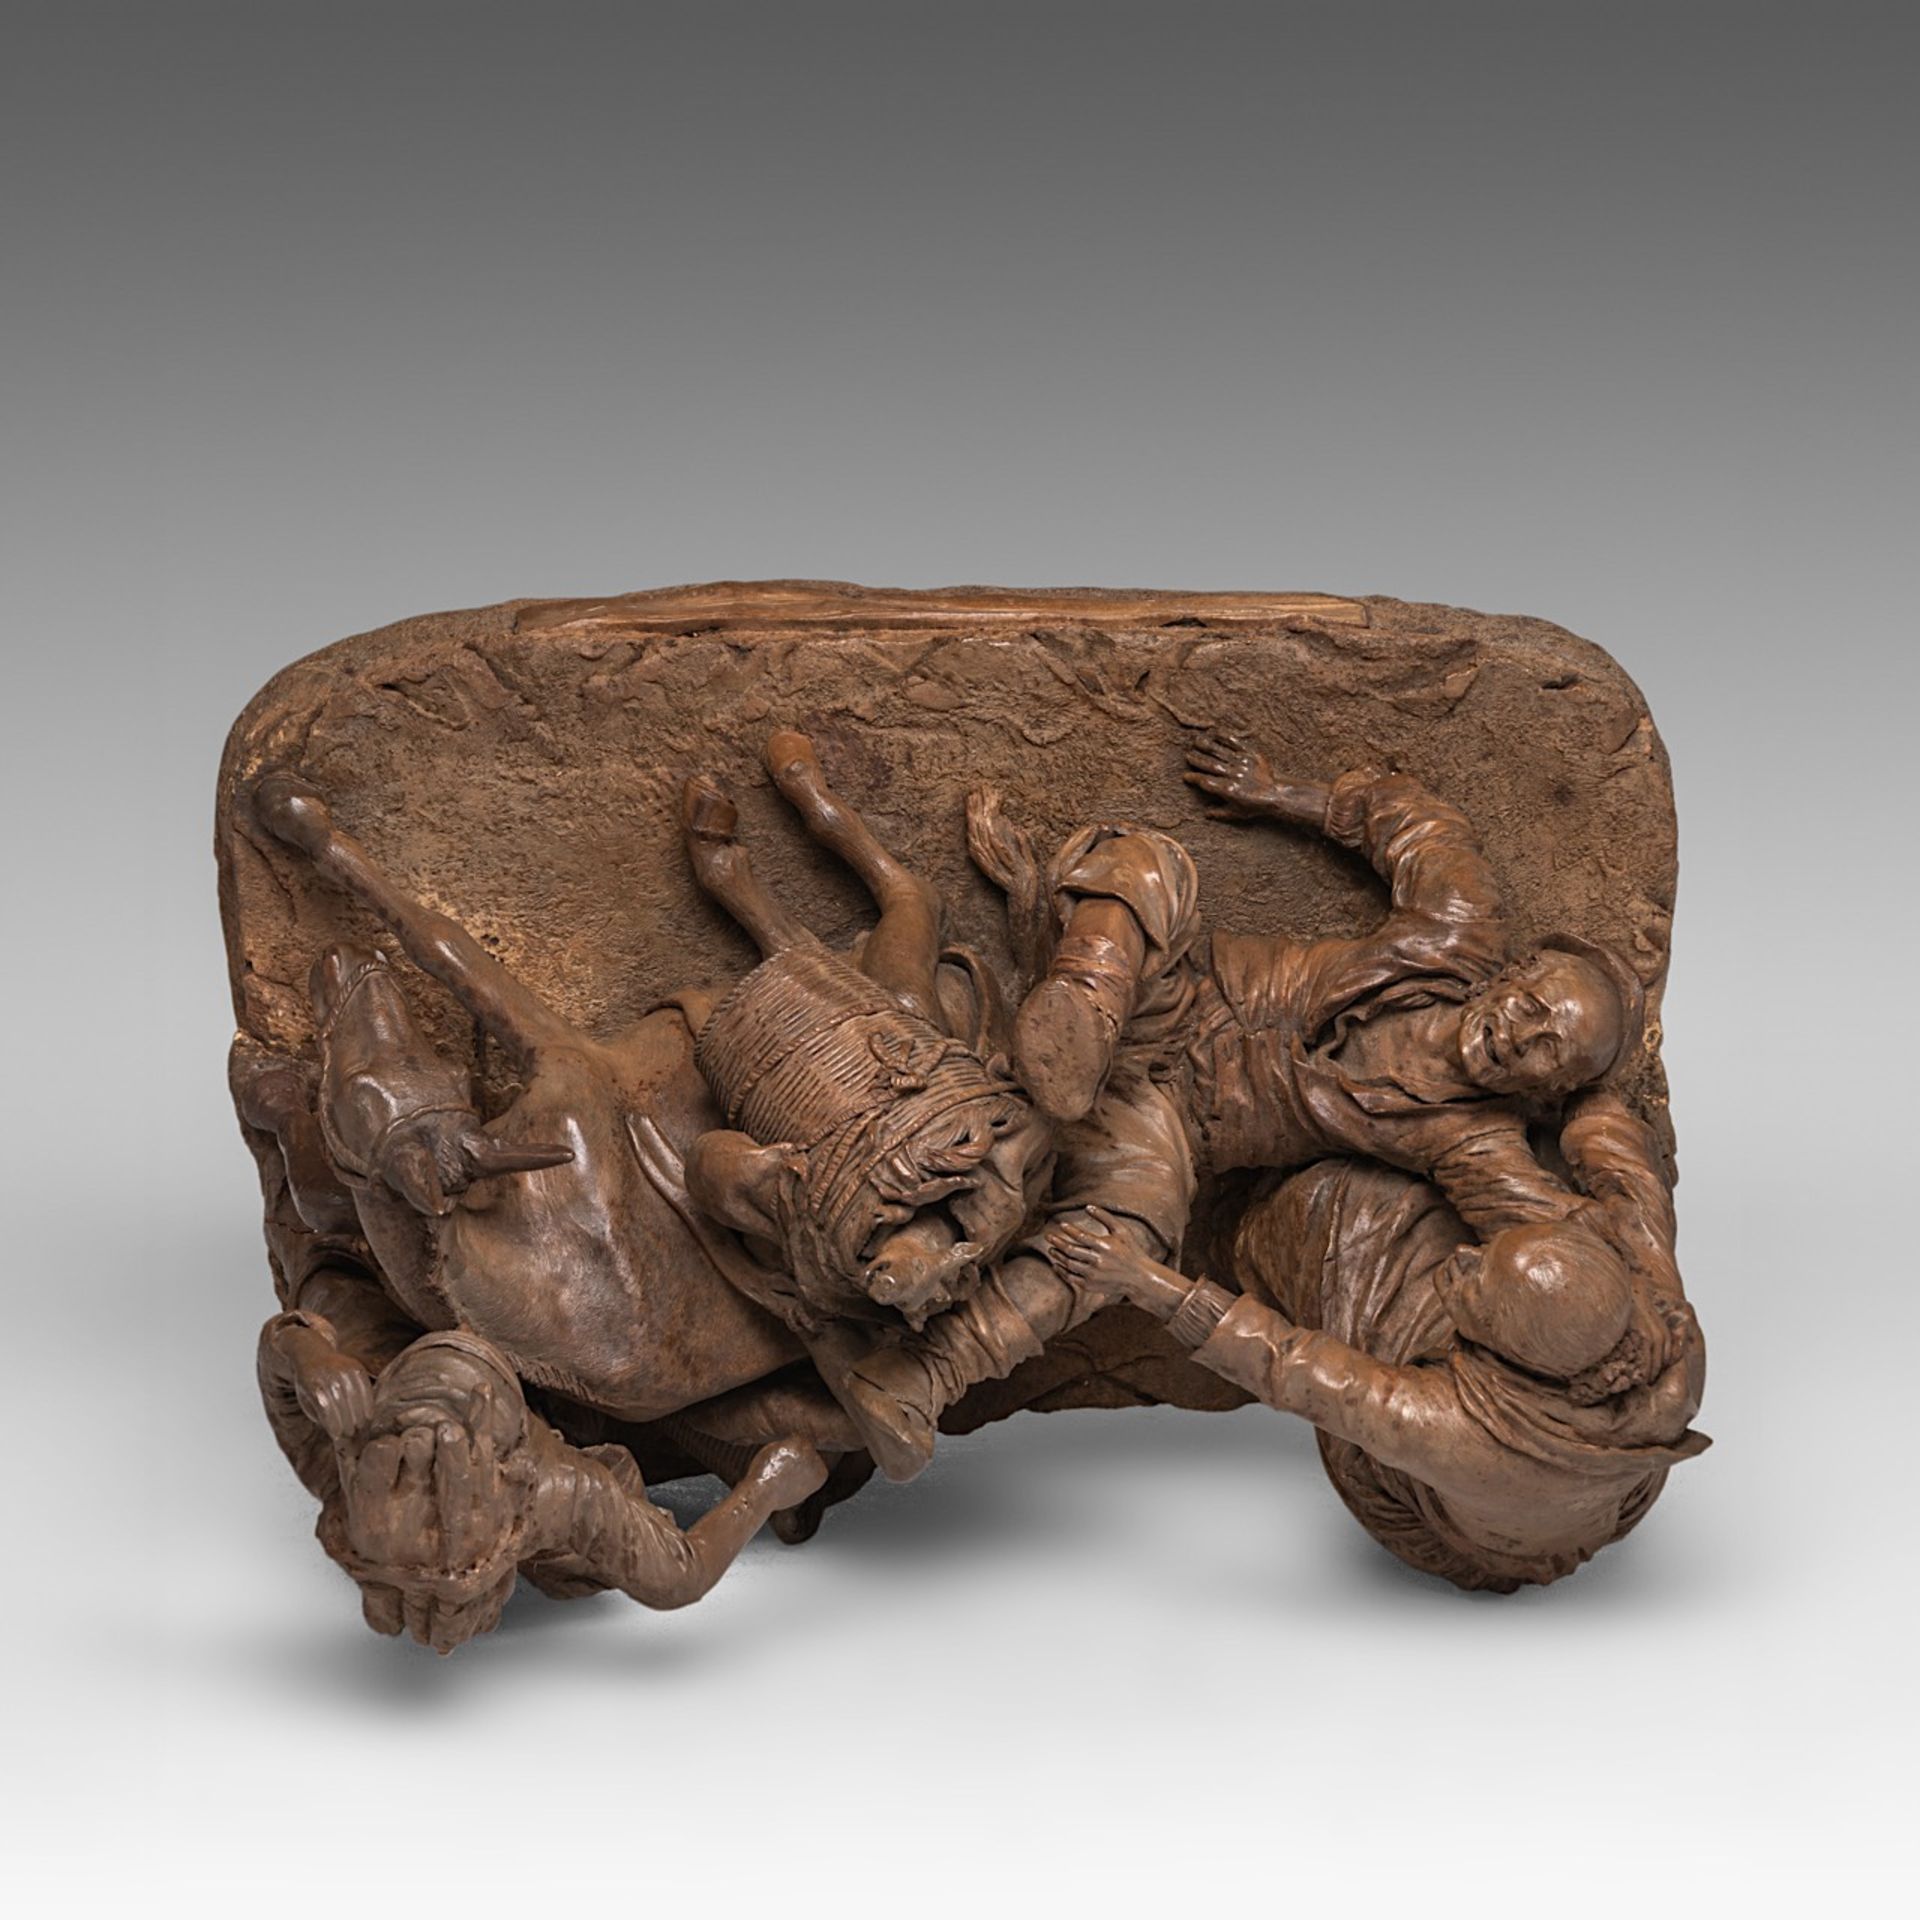 A fine terracotta group with an animated scene of a man falling off his mule, 19tC, H 29 - W 35 cm - Bild 6 aus 7